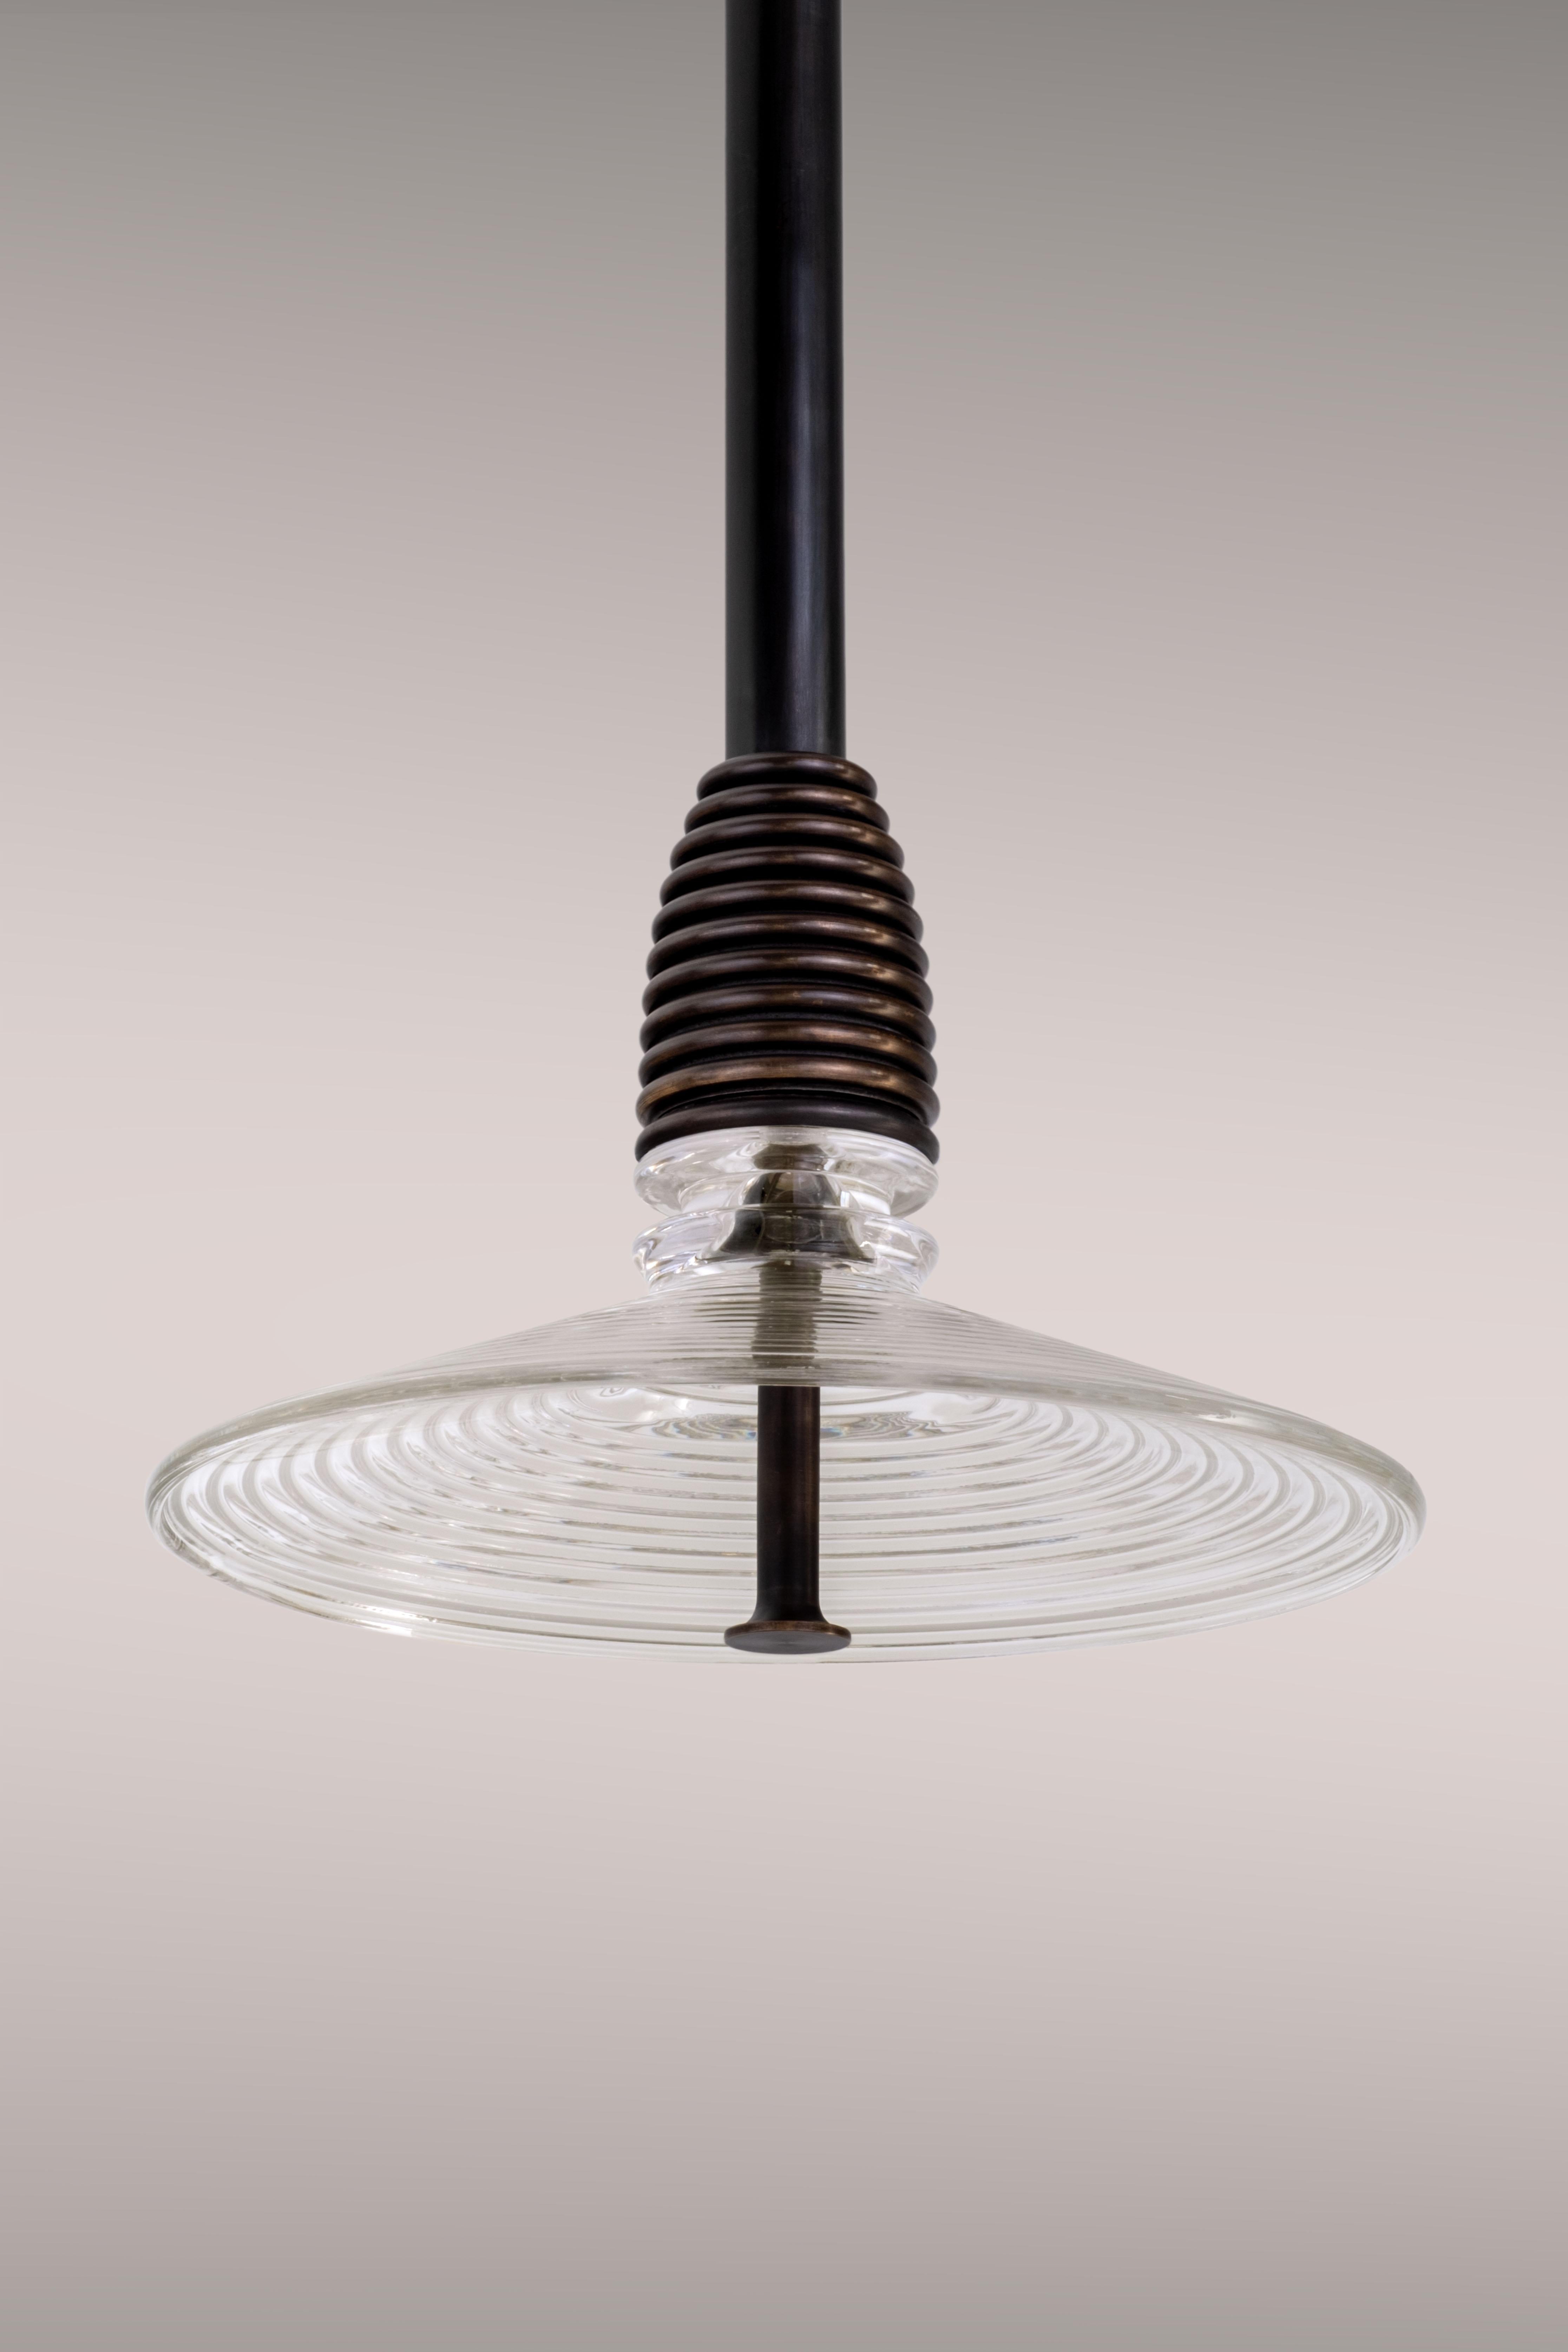 British The Insulator 'B' Pendant in dark brass and frosted glass by NOVOCASTRIAN deco For Sale